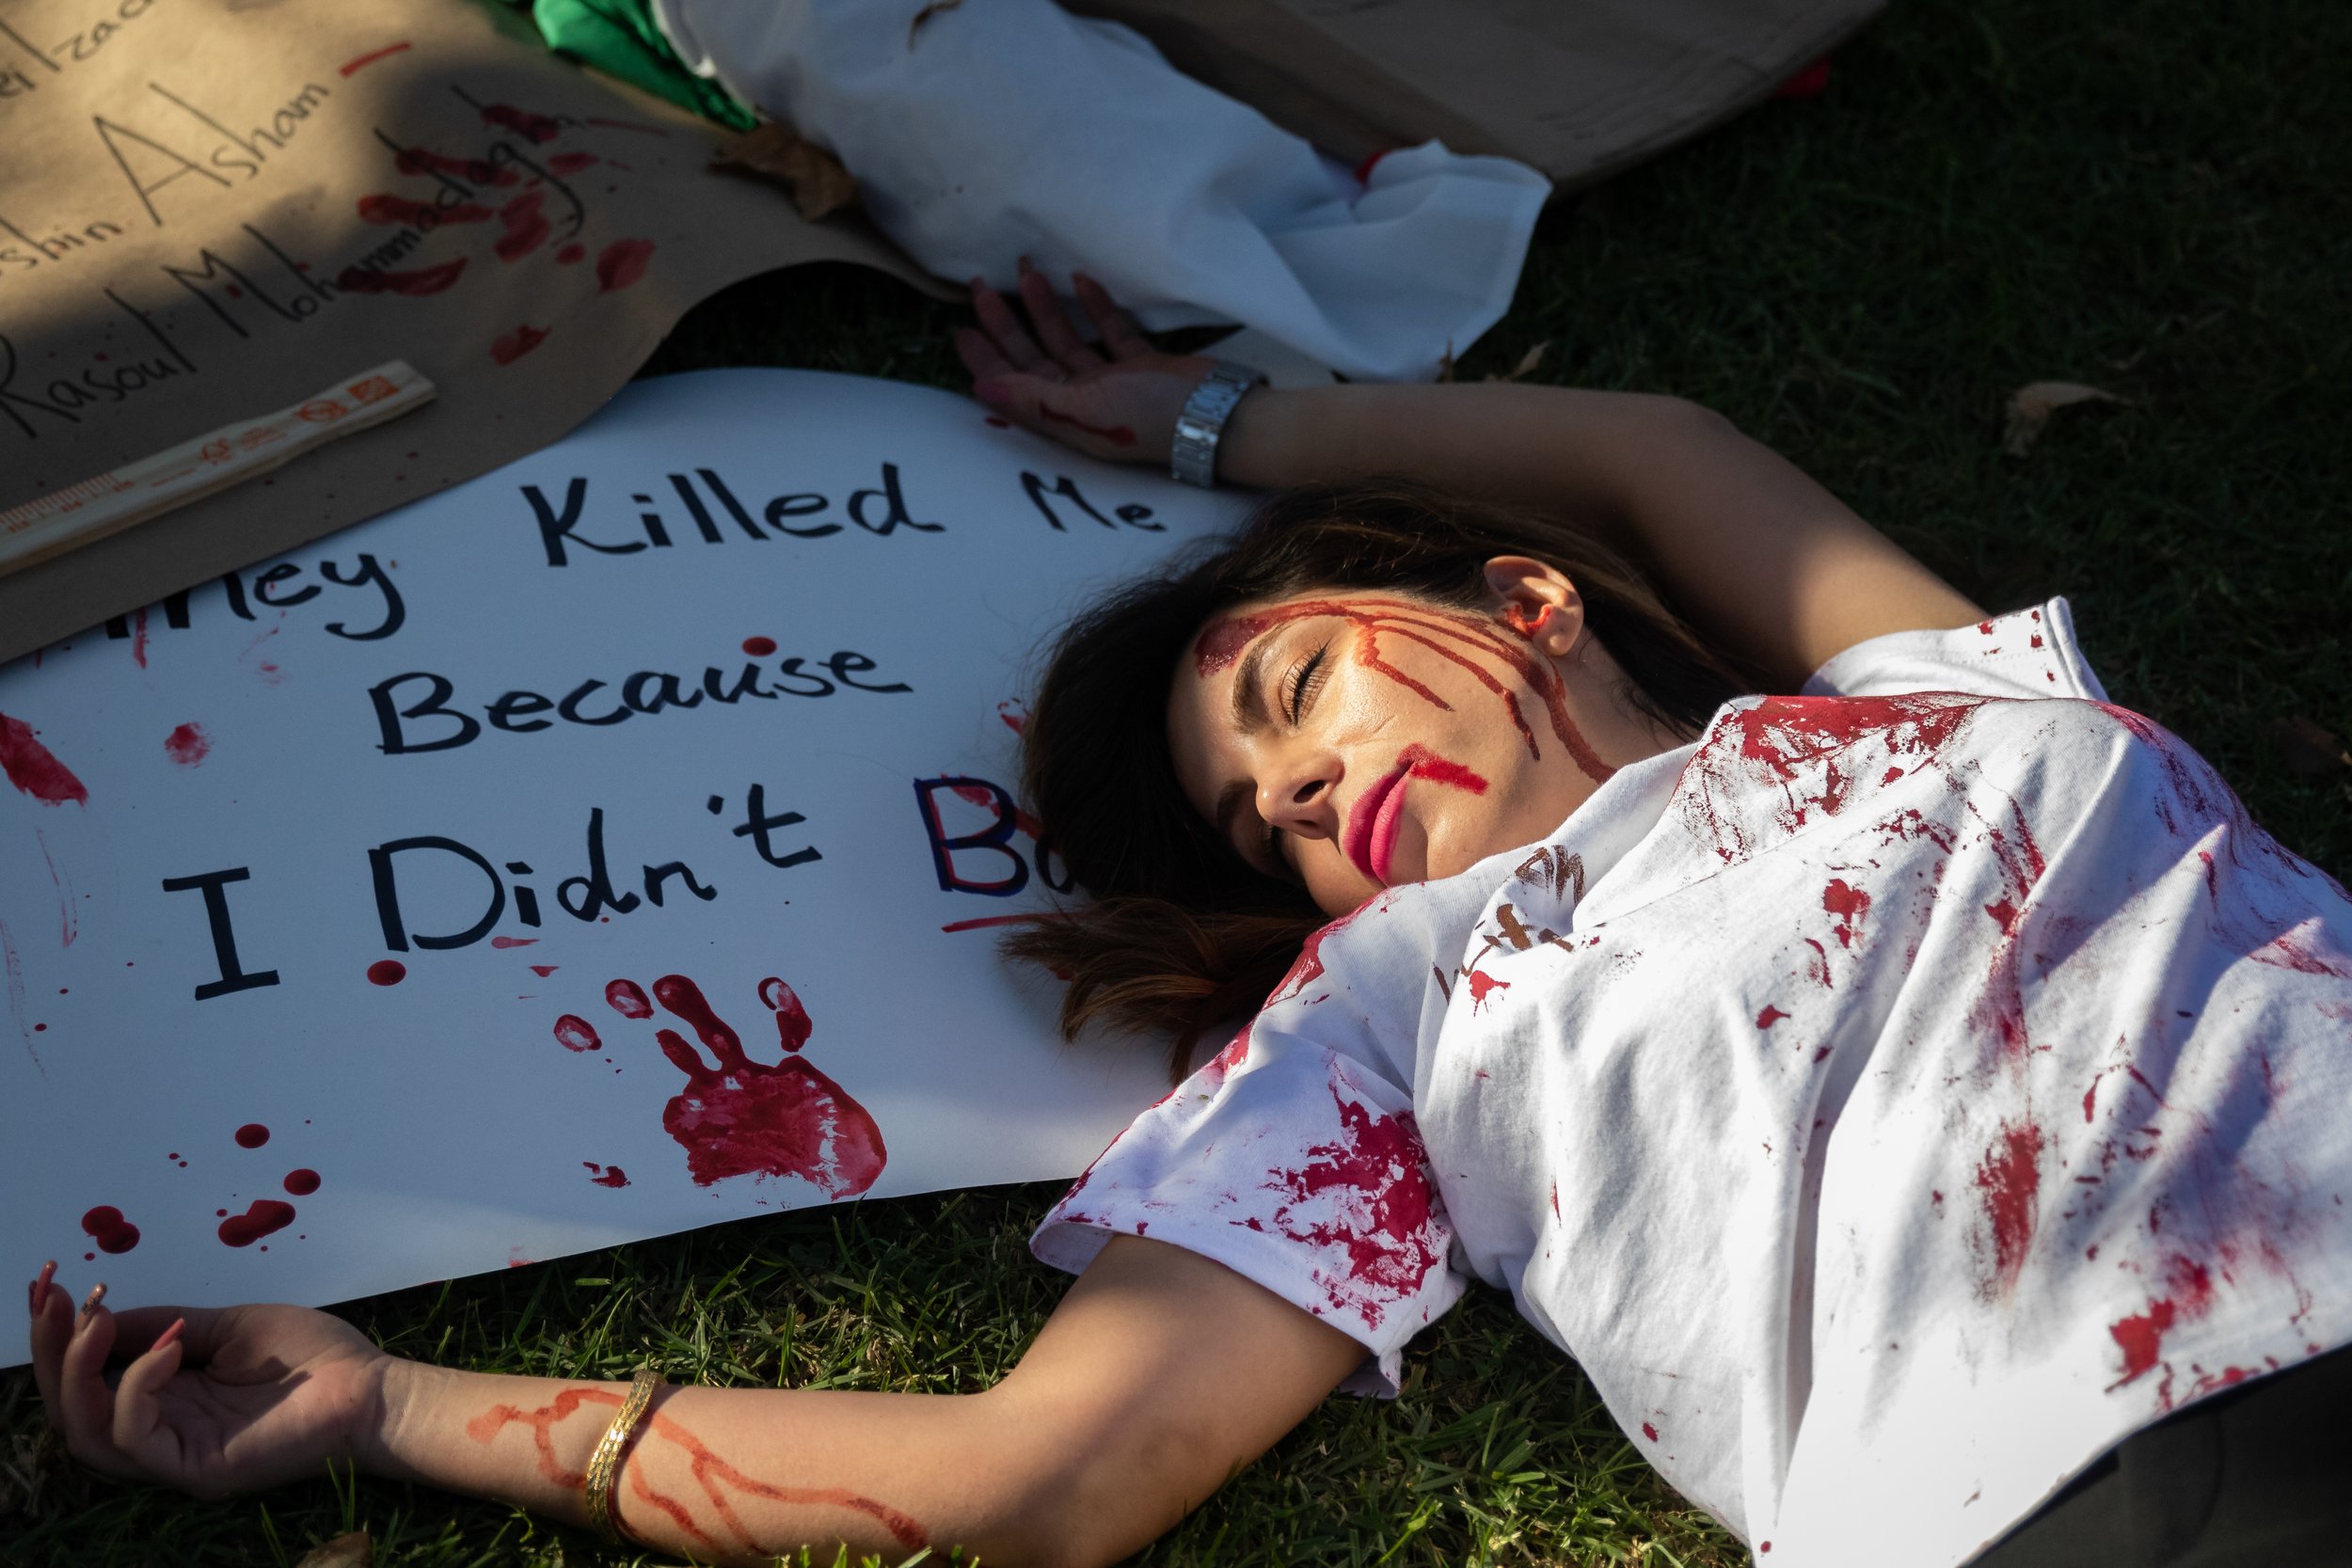  Bahar Khosropour performing a die-in in honor of those murdered and imprisoned in Iran. This performance was during the Freedom for Iran human chain in Glendale, Calif., on Saturday, Oct. 29, 2022, as part of a global action. (Caylo Seals | The Cors